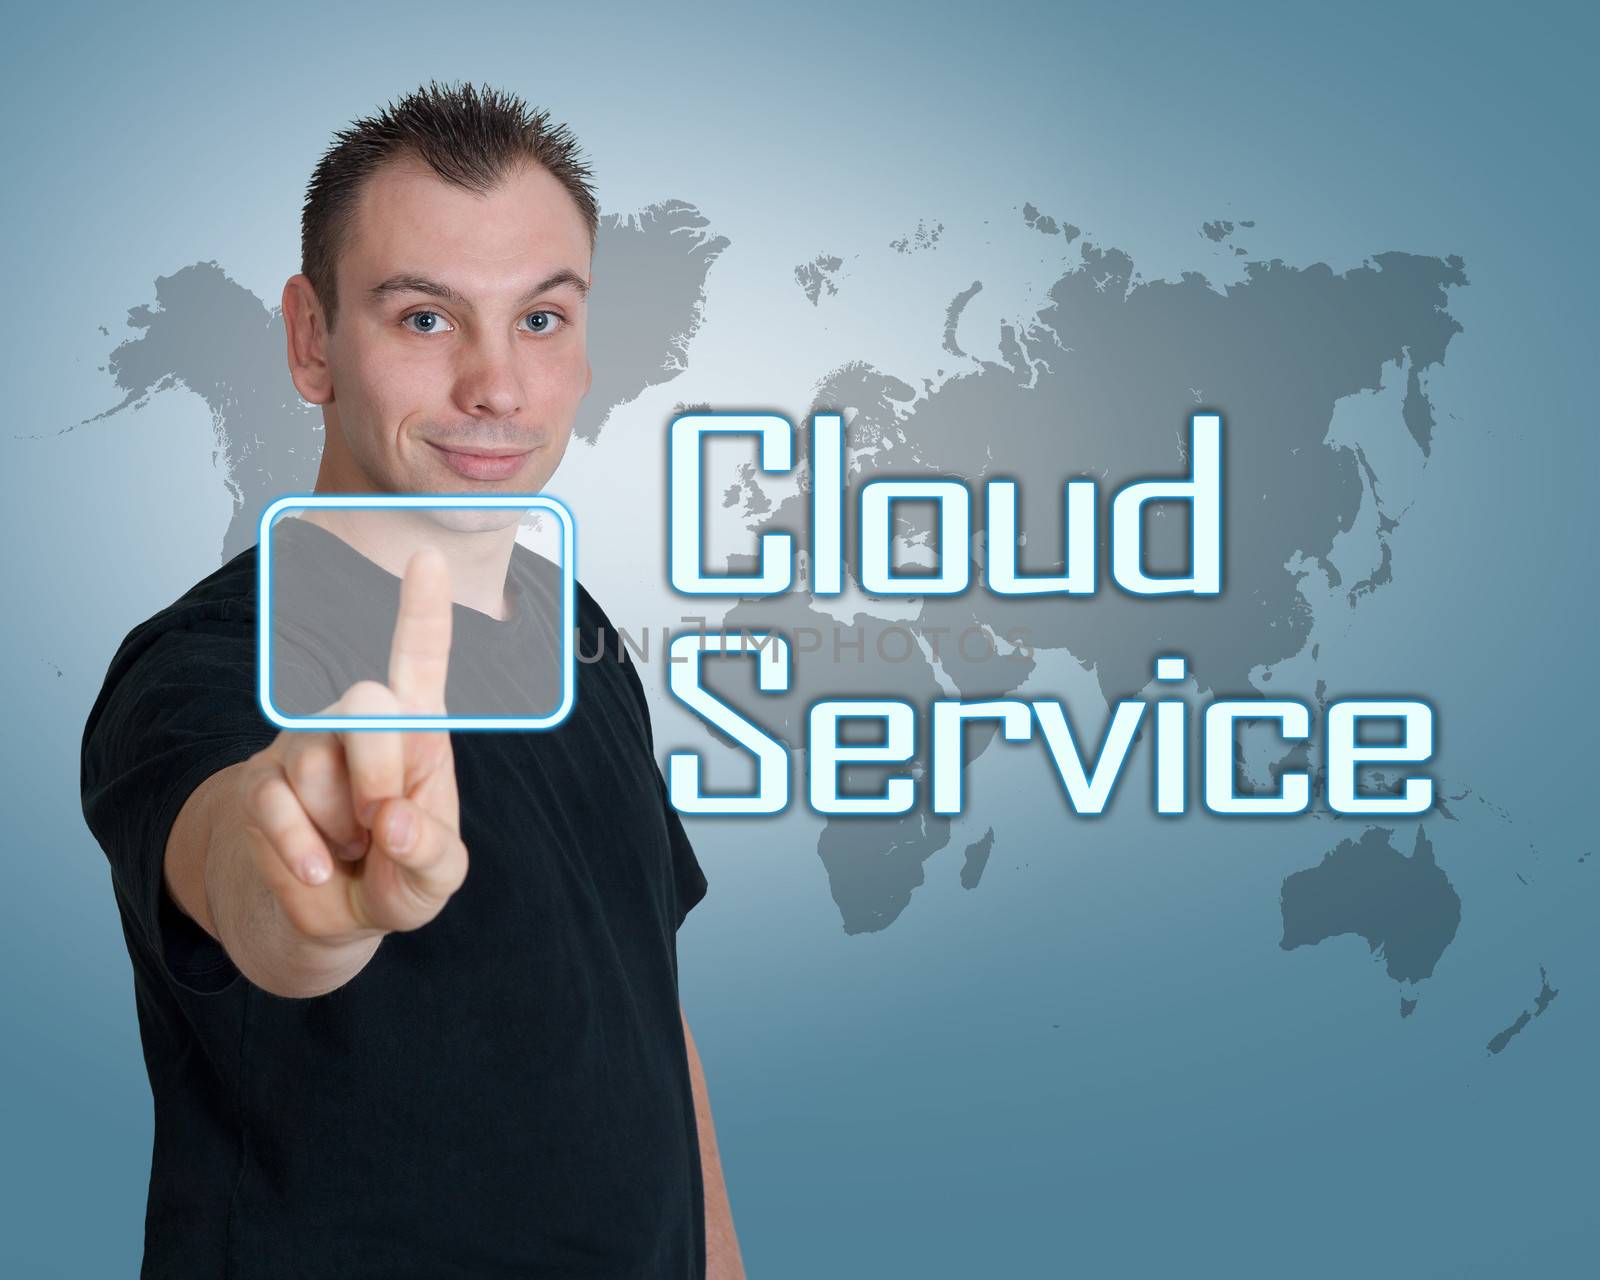 Young man press digital Cloud Service button on interface in front of him